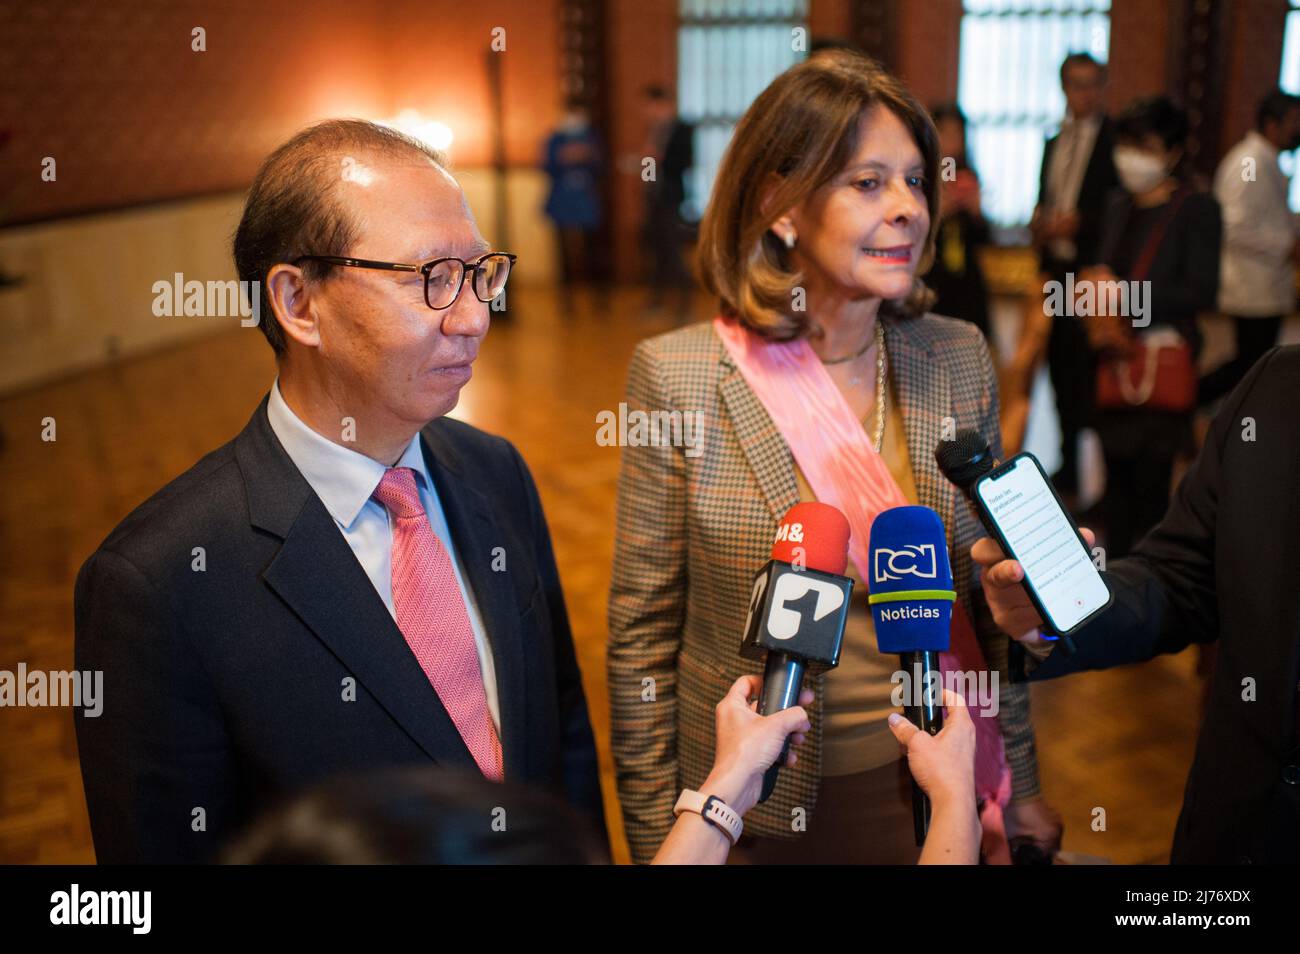 Bogota, Colombia on May 6, 2022. South Korean Ambassator Choo Jong-youn (L) and Colombia's Minister of Foreing Affairs and Vice President Martha Lucia Ramirez speak to the media during the event at Colombia's Minister of Foreign Affairs celebrating the 60 years of diplomatic relations between Colombia and South Korea celebrated with a new postal commemorative stamp in Bogota, Colombia on May 6, 2022. Photo by: Sebastian Barros/Long Visual Press Credit: Long Visual Press/Alamy Live News Stock Photo